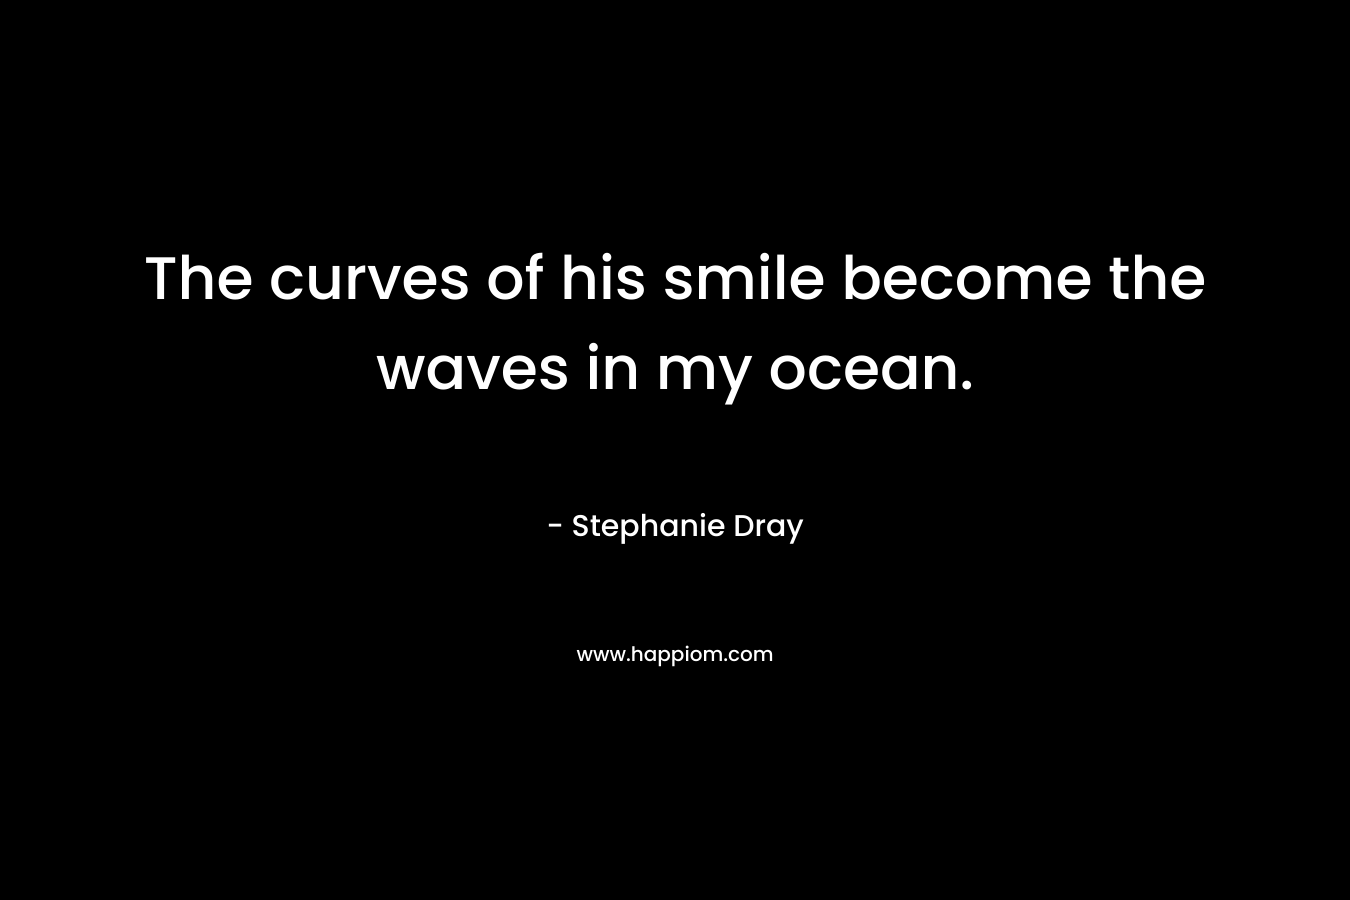 The curves of his smile become the waves in my ocean. – Stephanie Dray